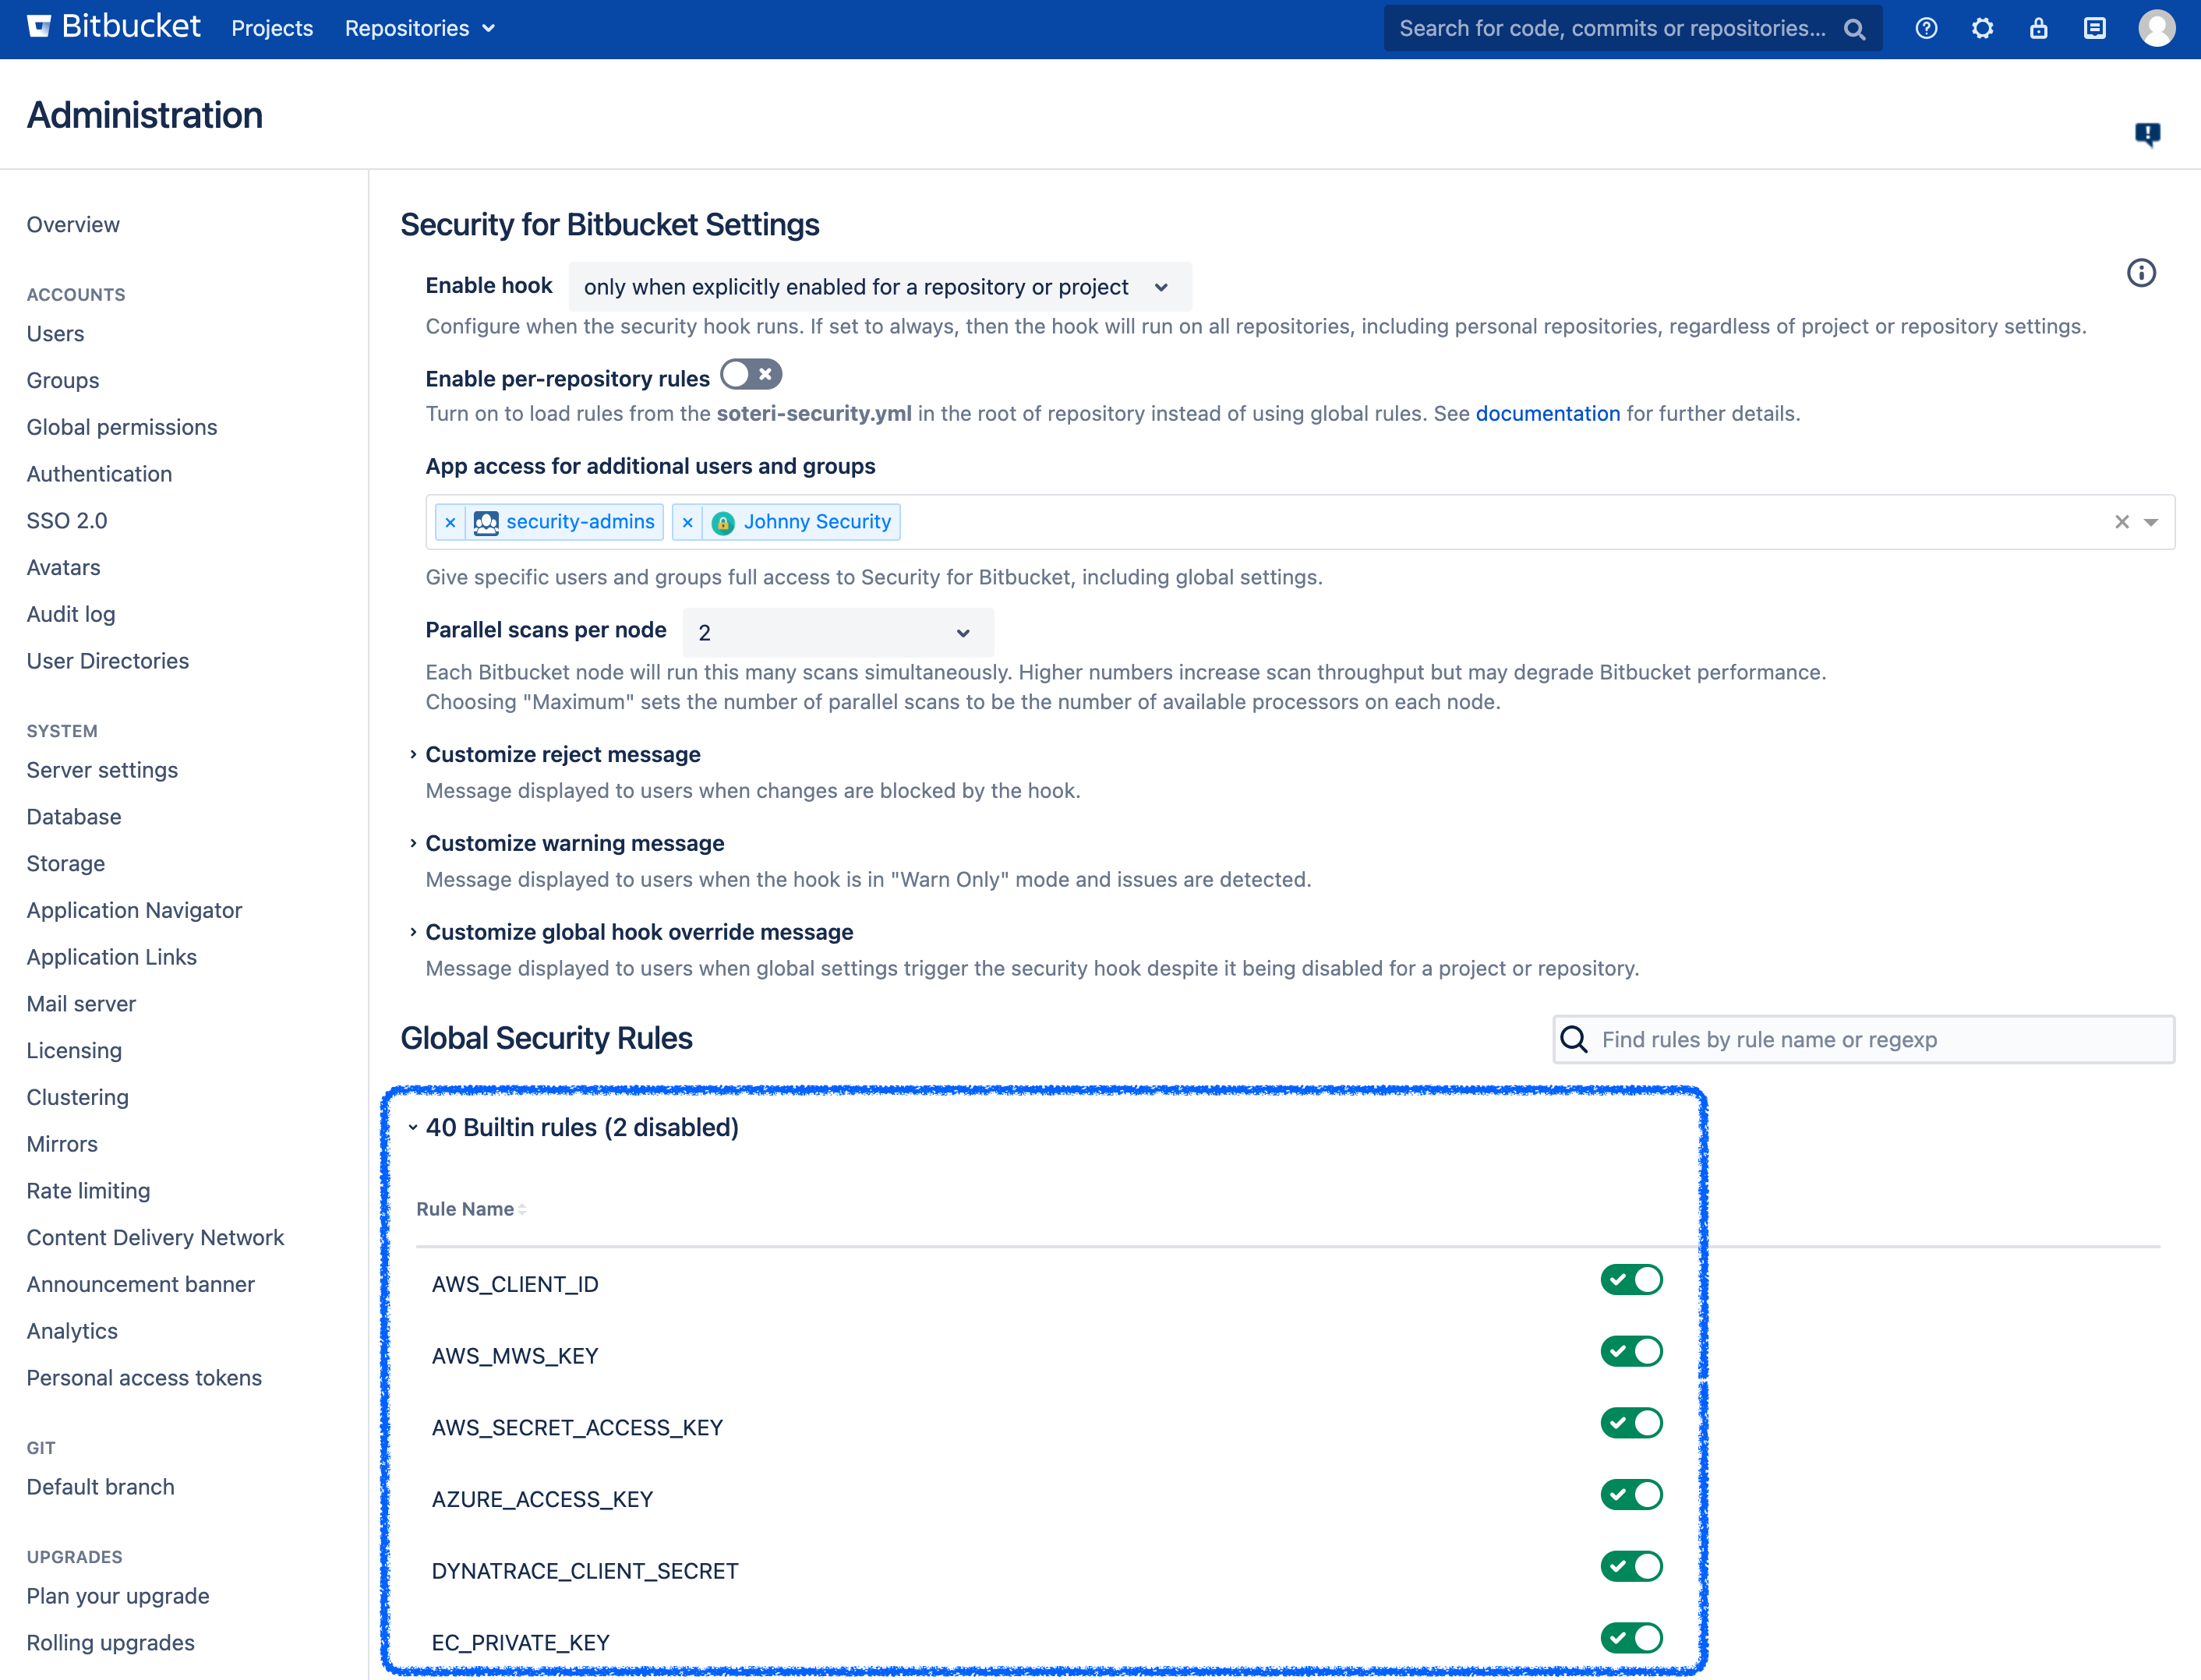 Global rule configuration in the Security for Bitbucket settings.